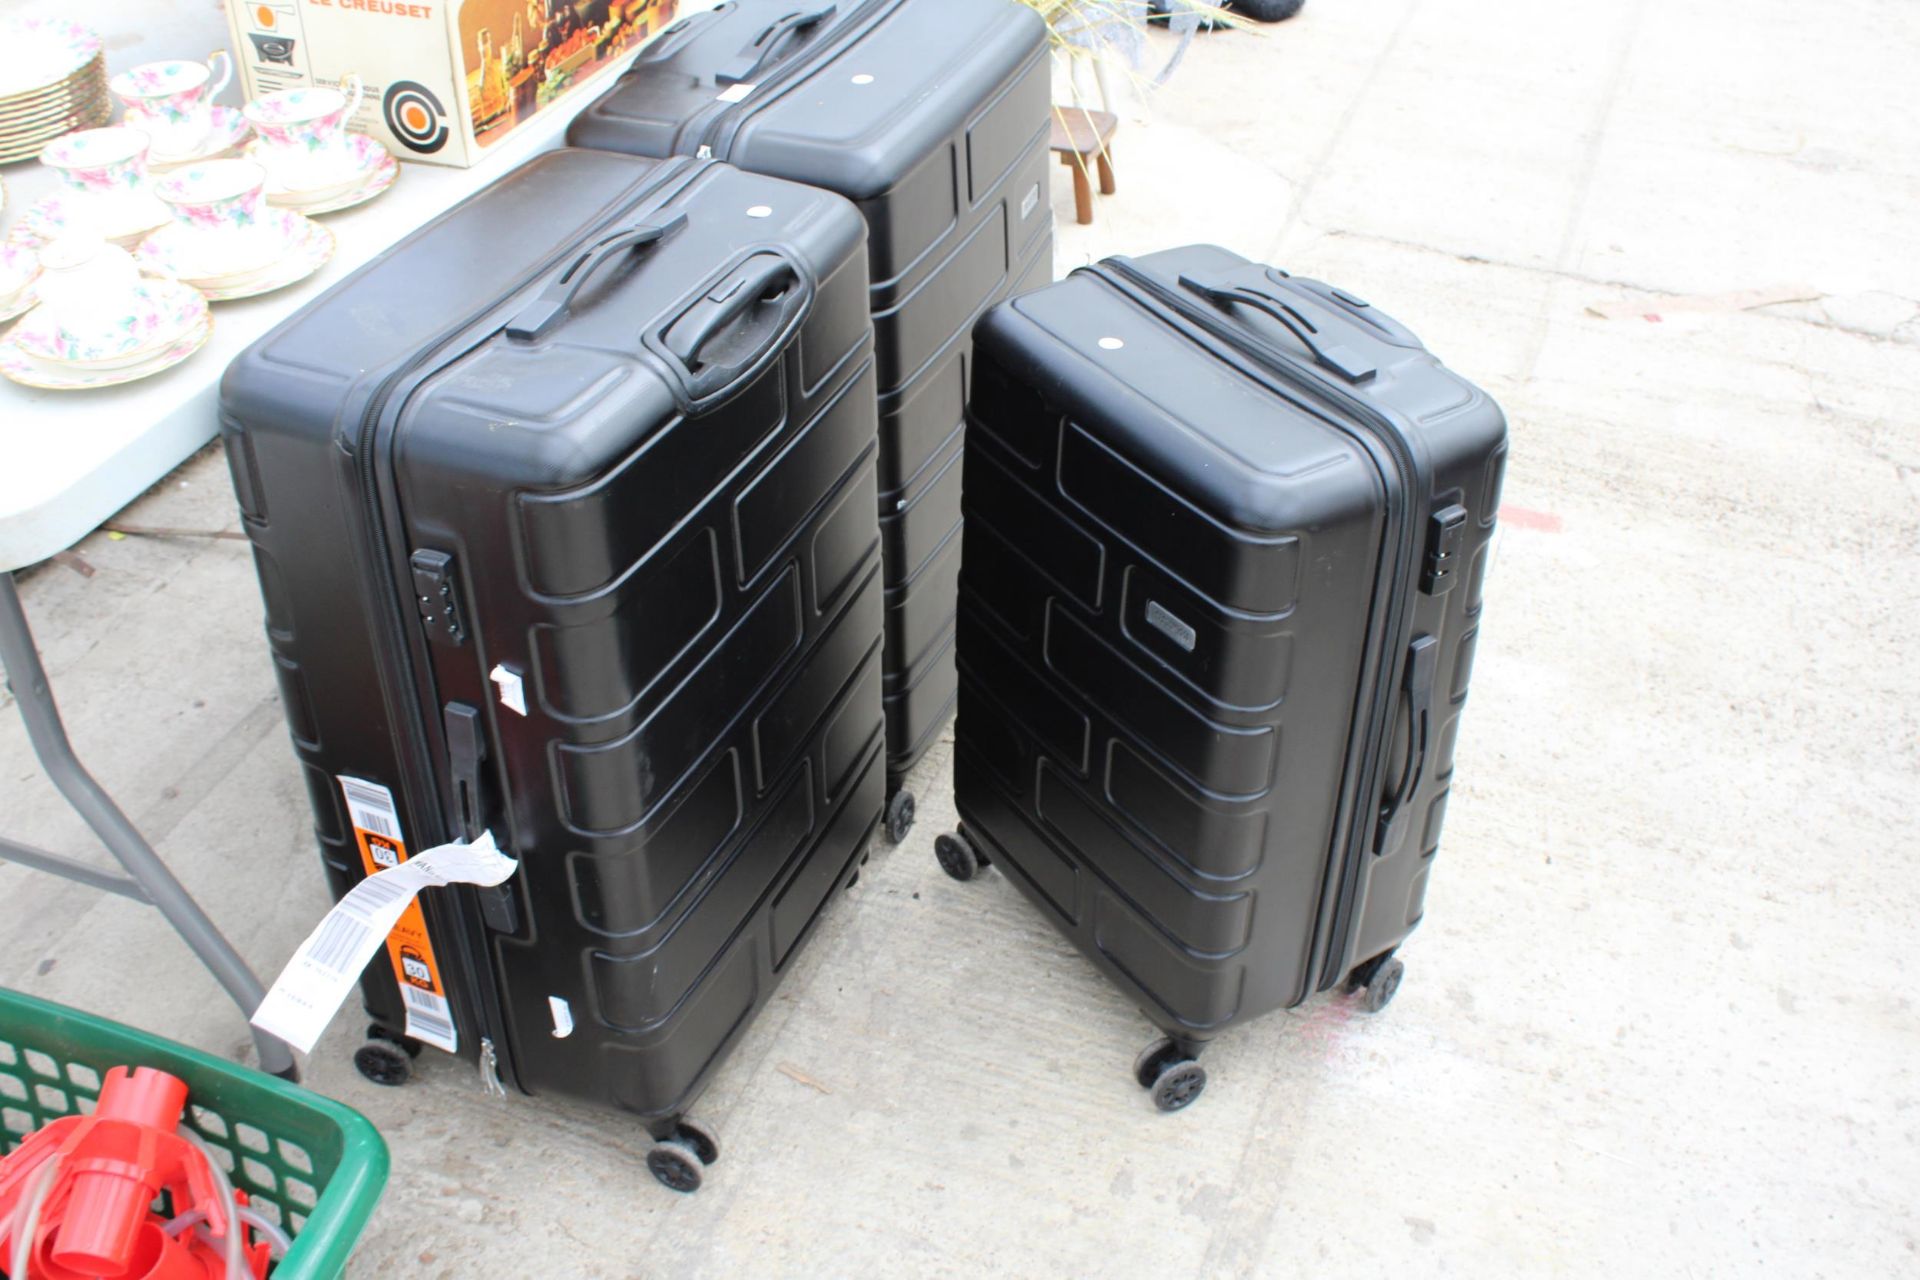 A SET OF THREE AMERICAN TOURISTER SUITCASES - Image 2 of 2